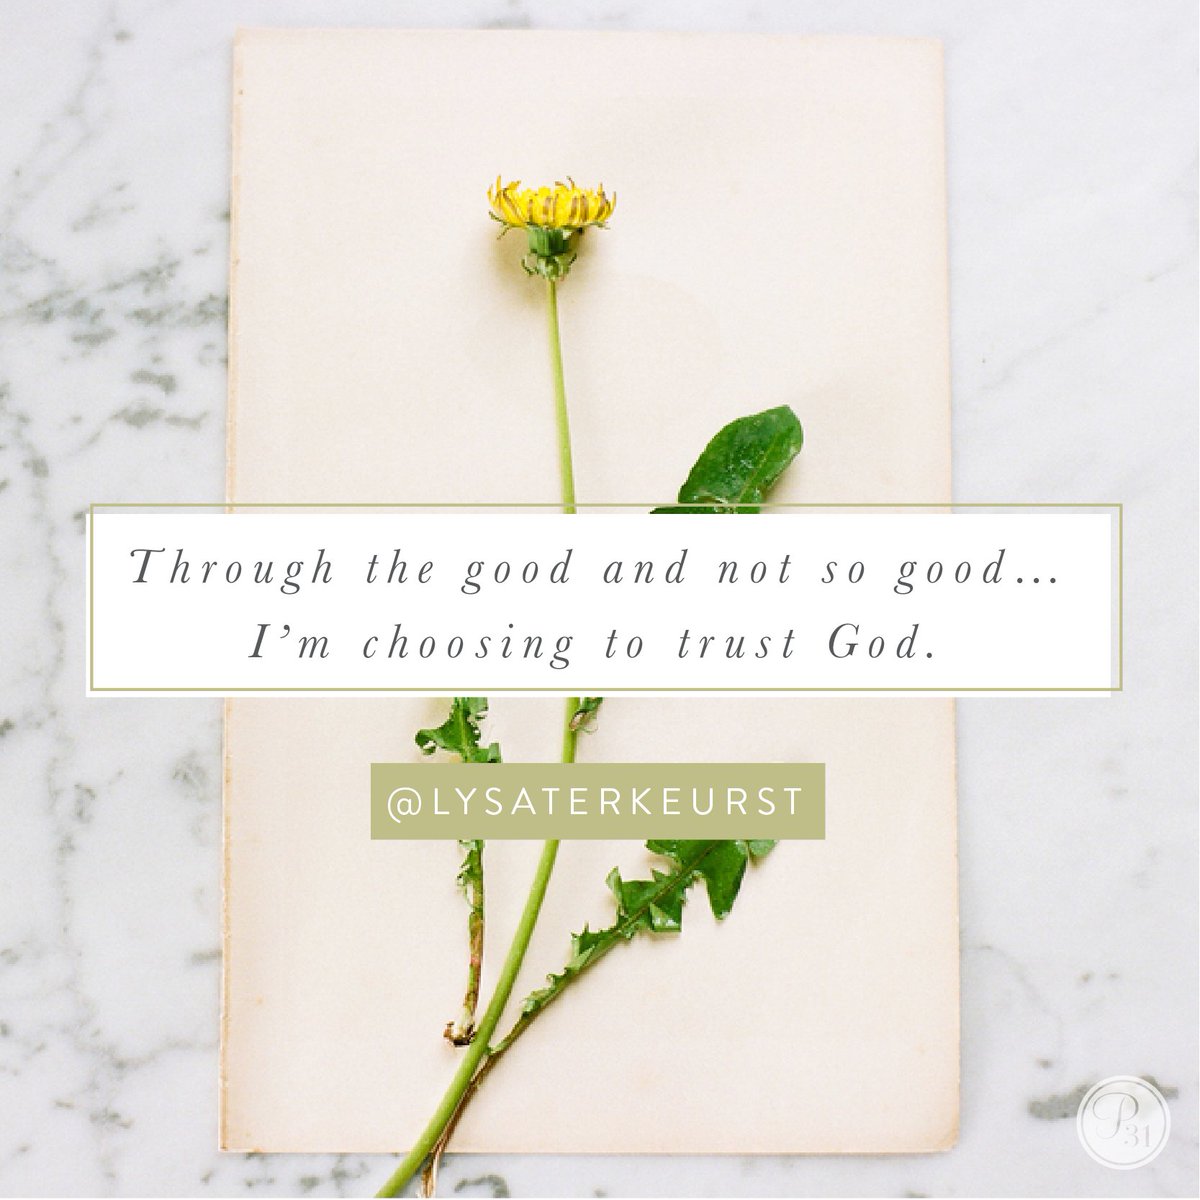 Real faith isn’t a hopeful wish. Real faith is making the decision that no matter the outcome, we’ll choose to see it as God’s perfect answer. This doesn’t mean we won’t cry and express hurt. But through the good and not so good, we will choose to trust Him. Because God is good.